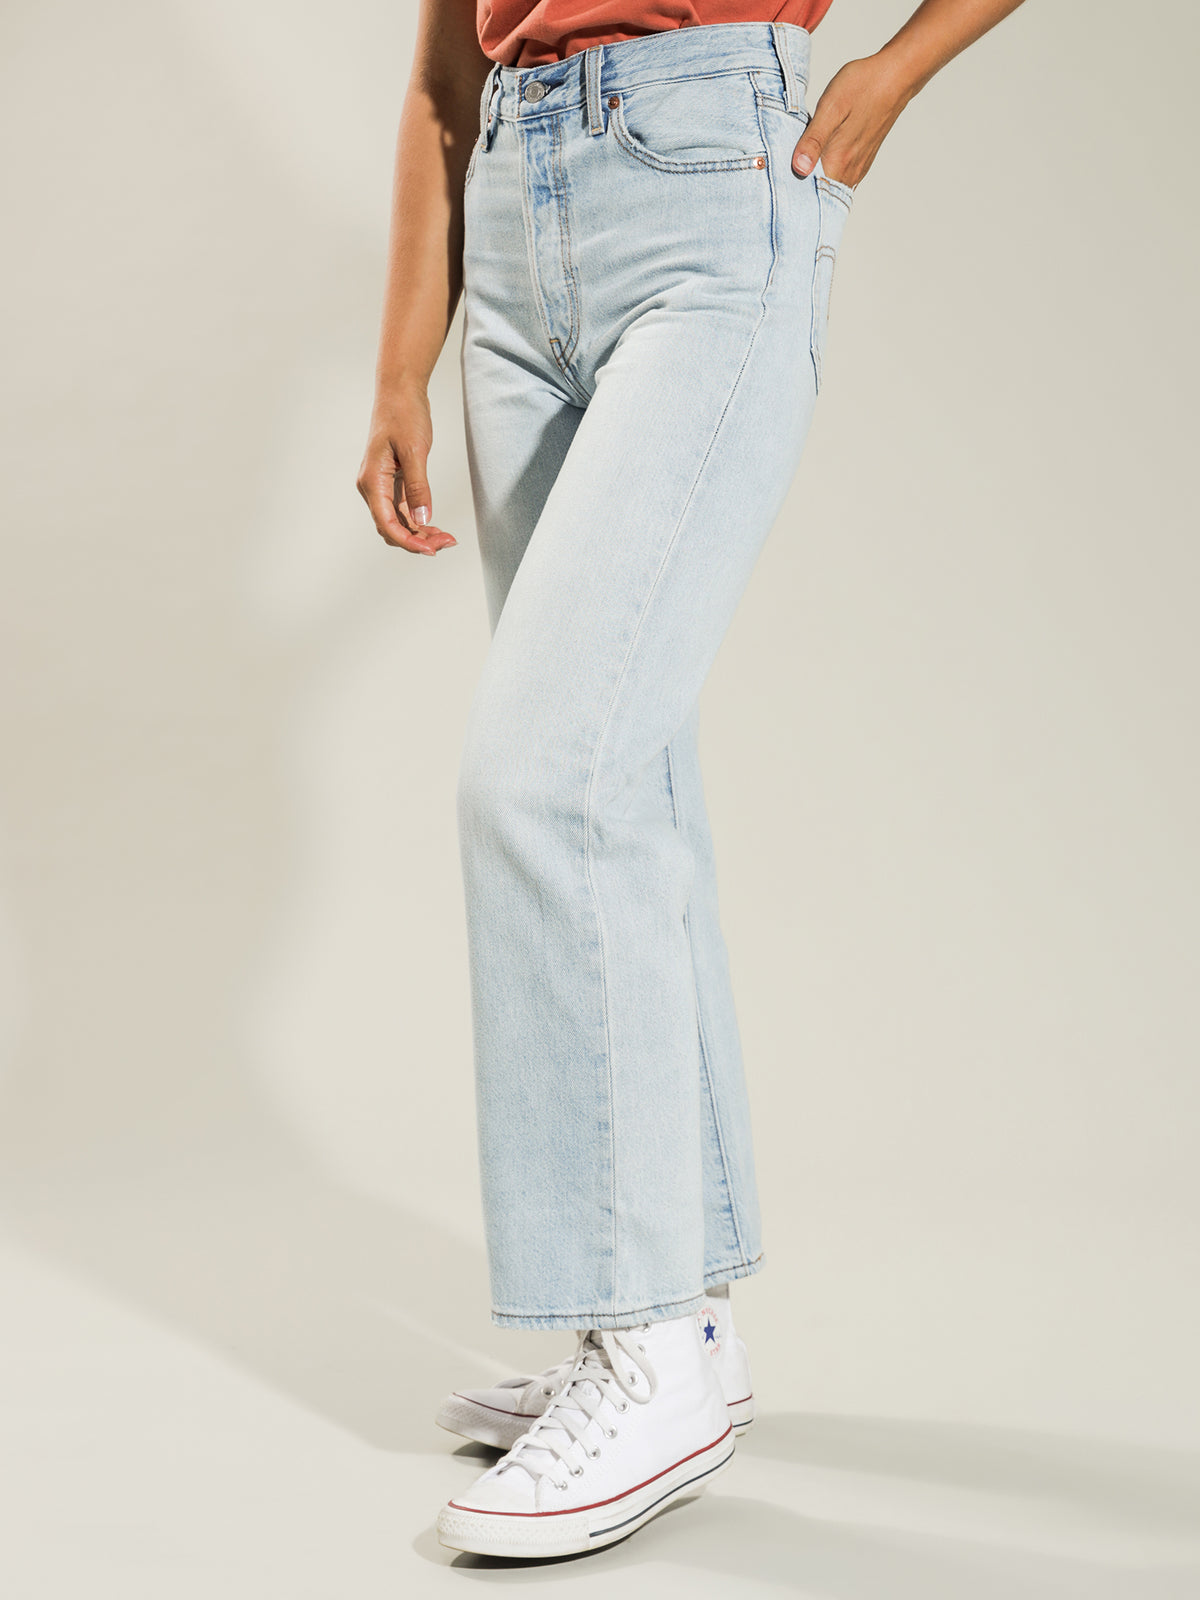 Ribcage Straight Ankle Jean in Middle Road